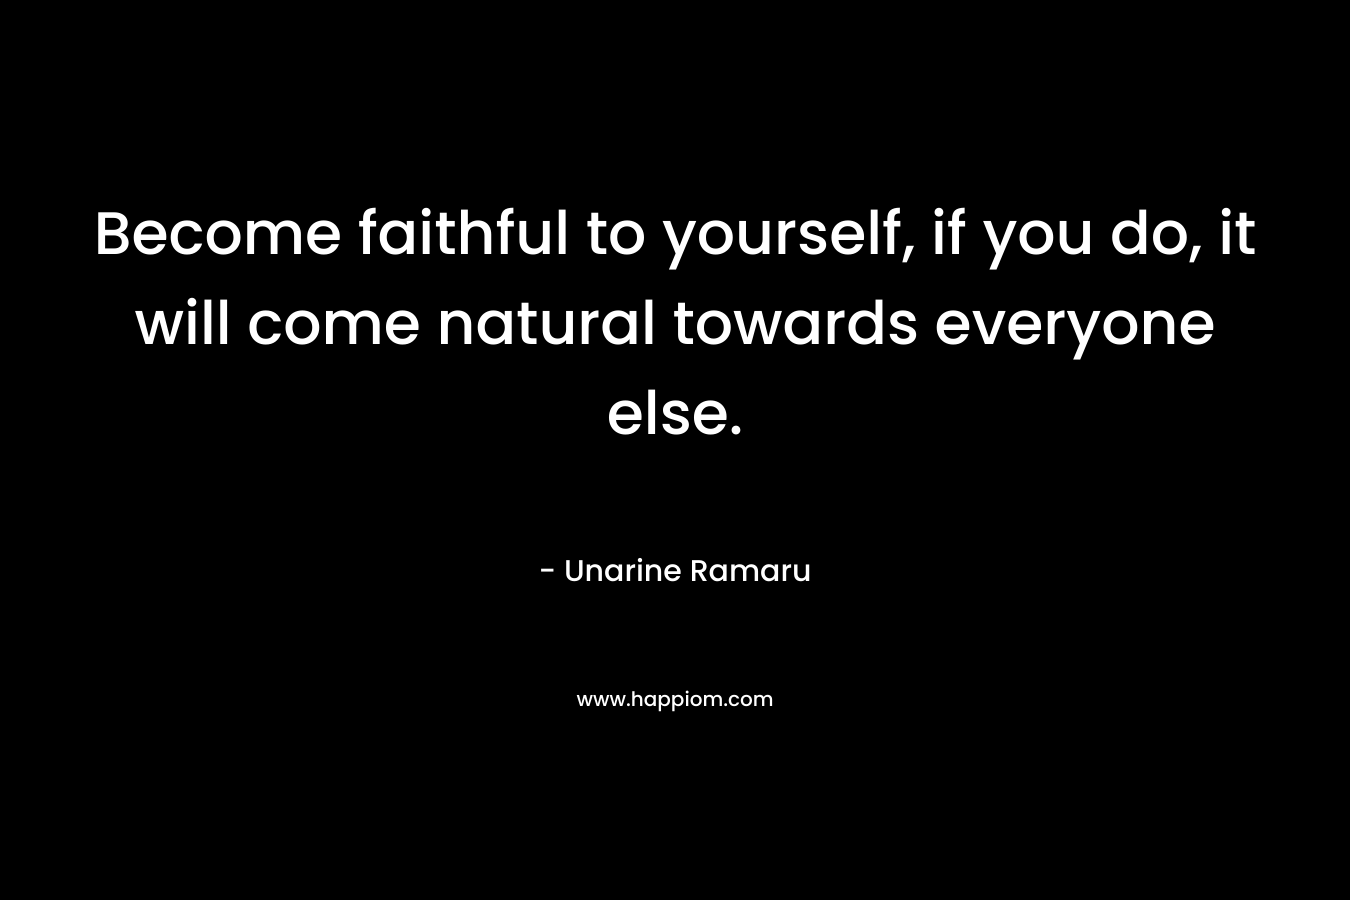 Become faithful to yourself, if you do, it will come natural towards everyone else.